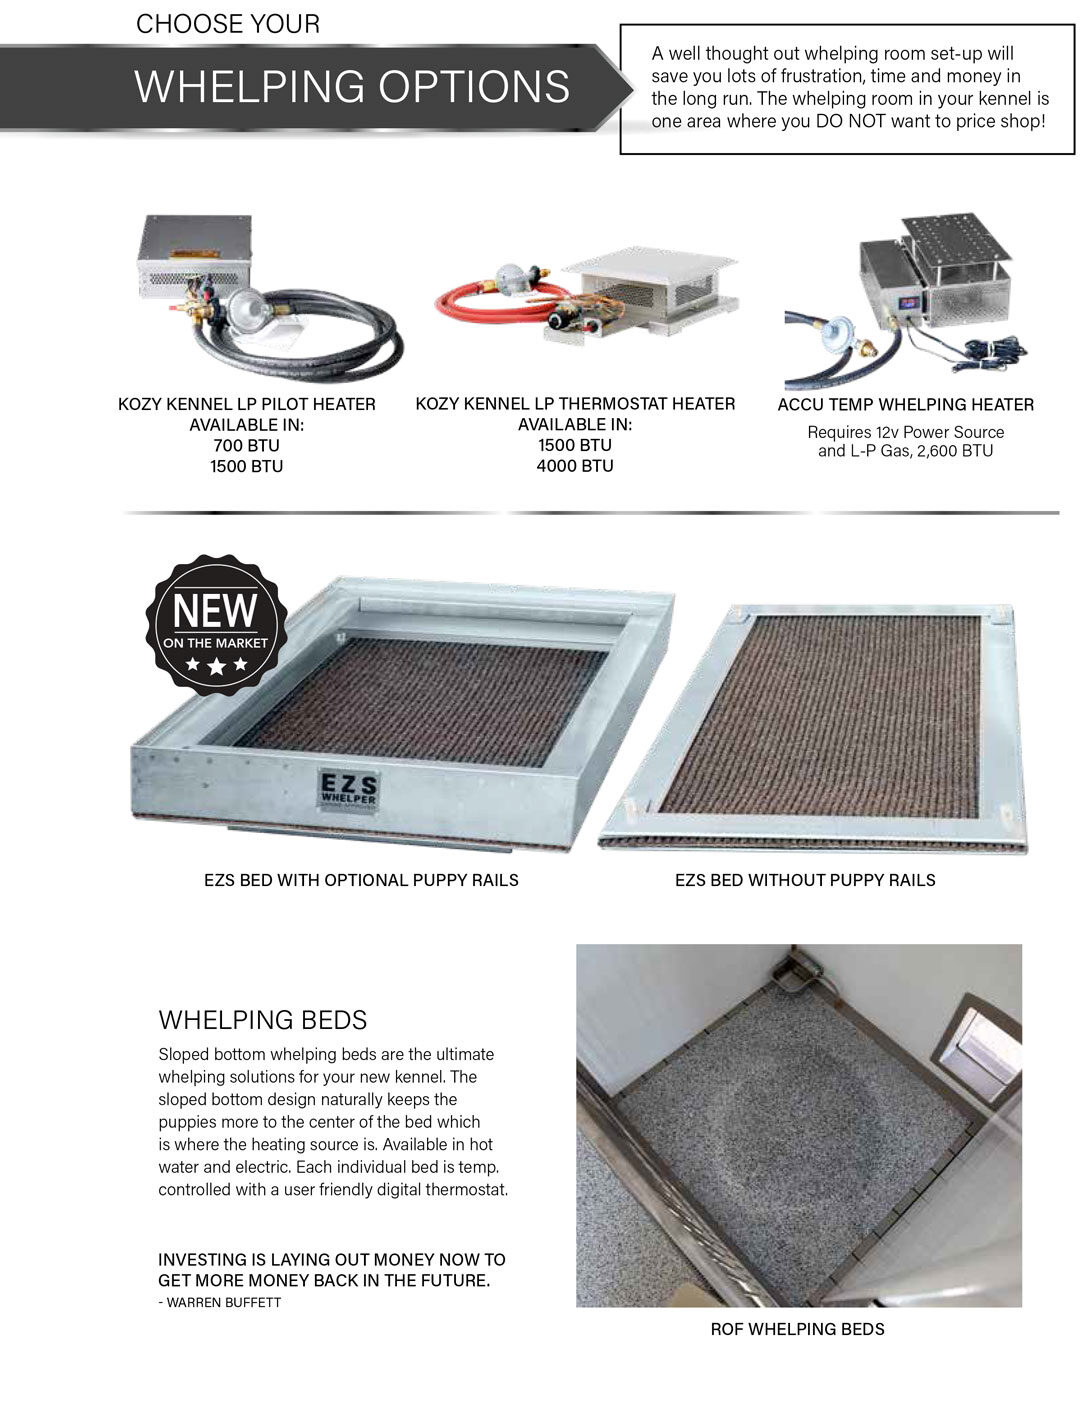 dog kennel whelping options pg52